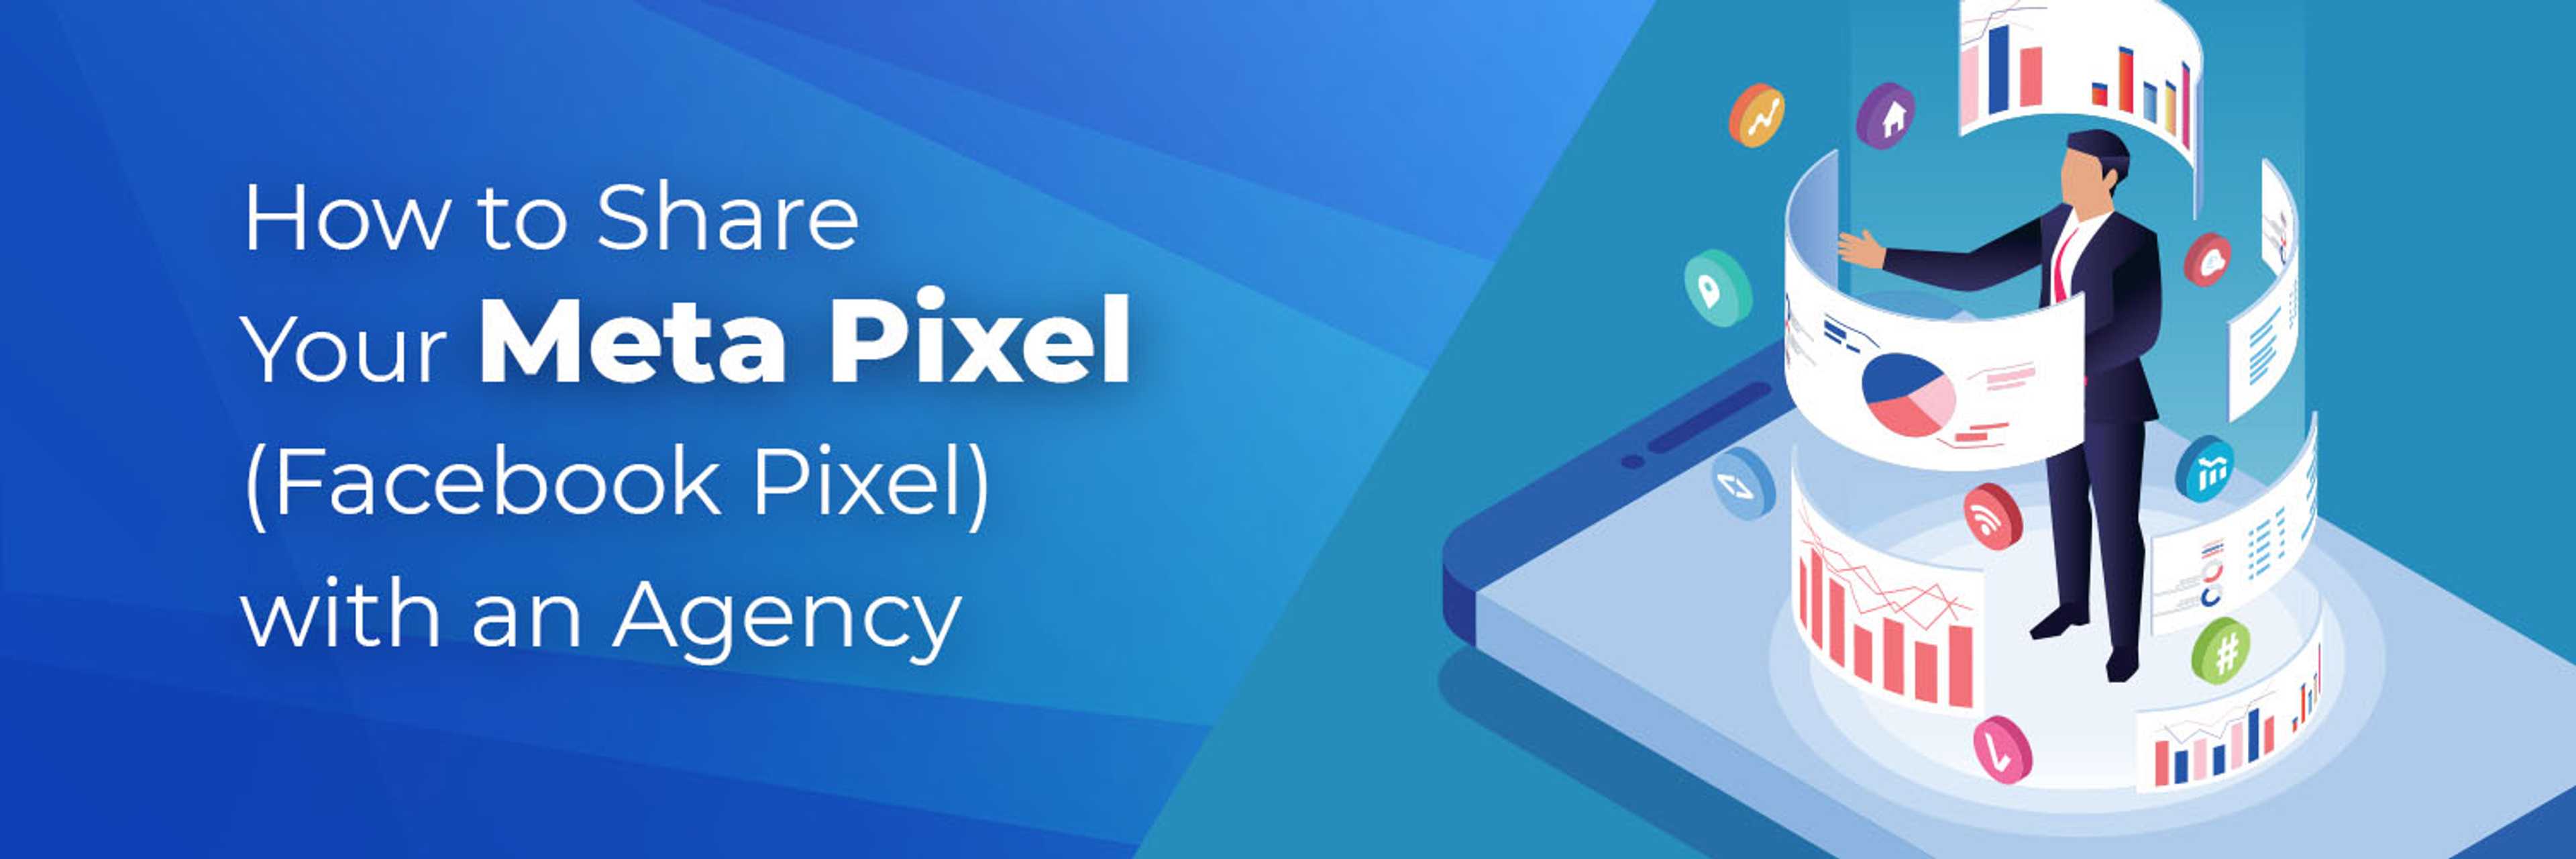 Cover for How to Share Your Meta Pixel (Facebook Pixel) with an Agency